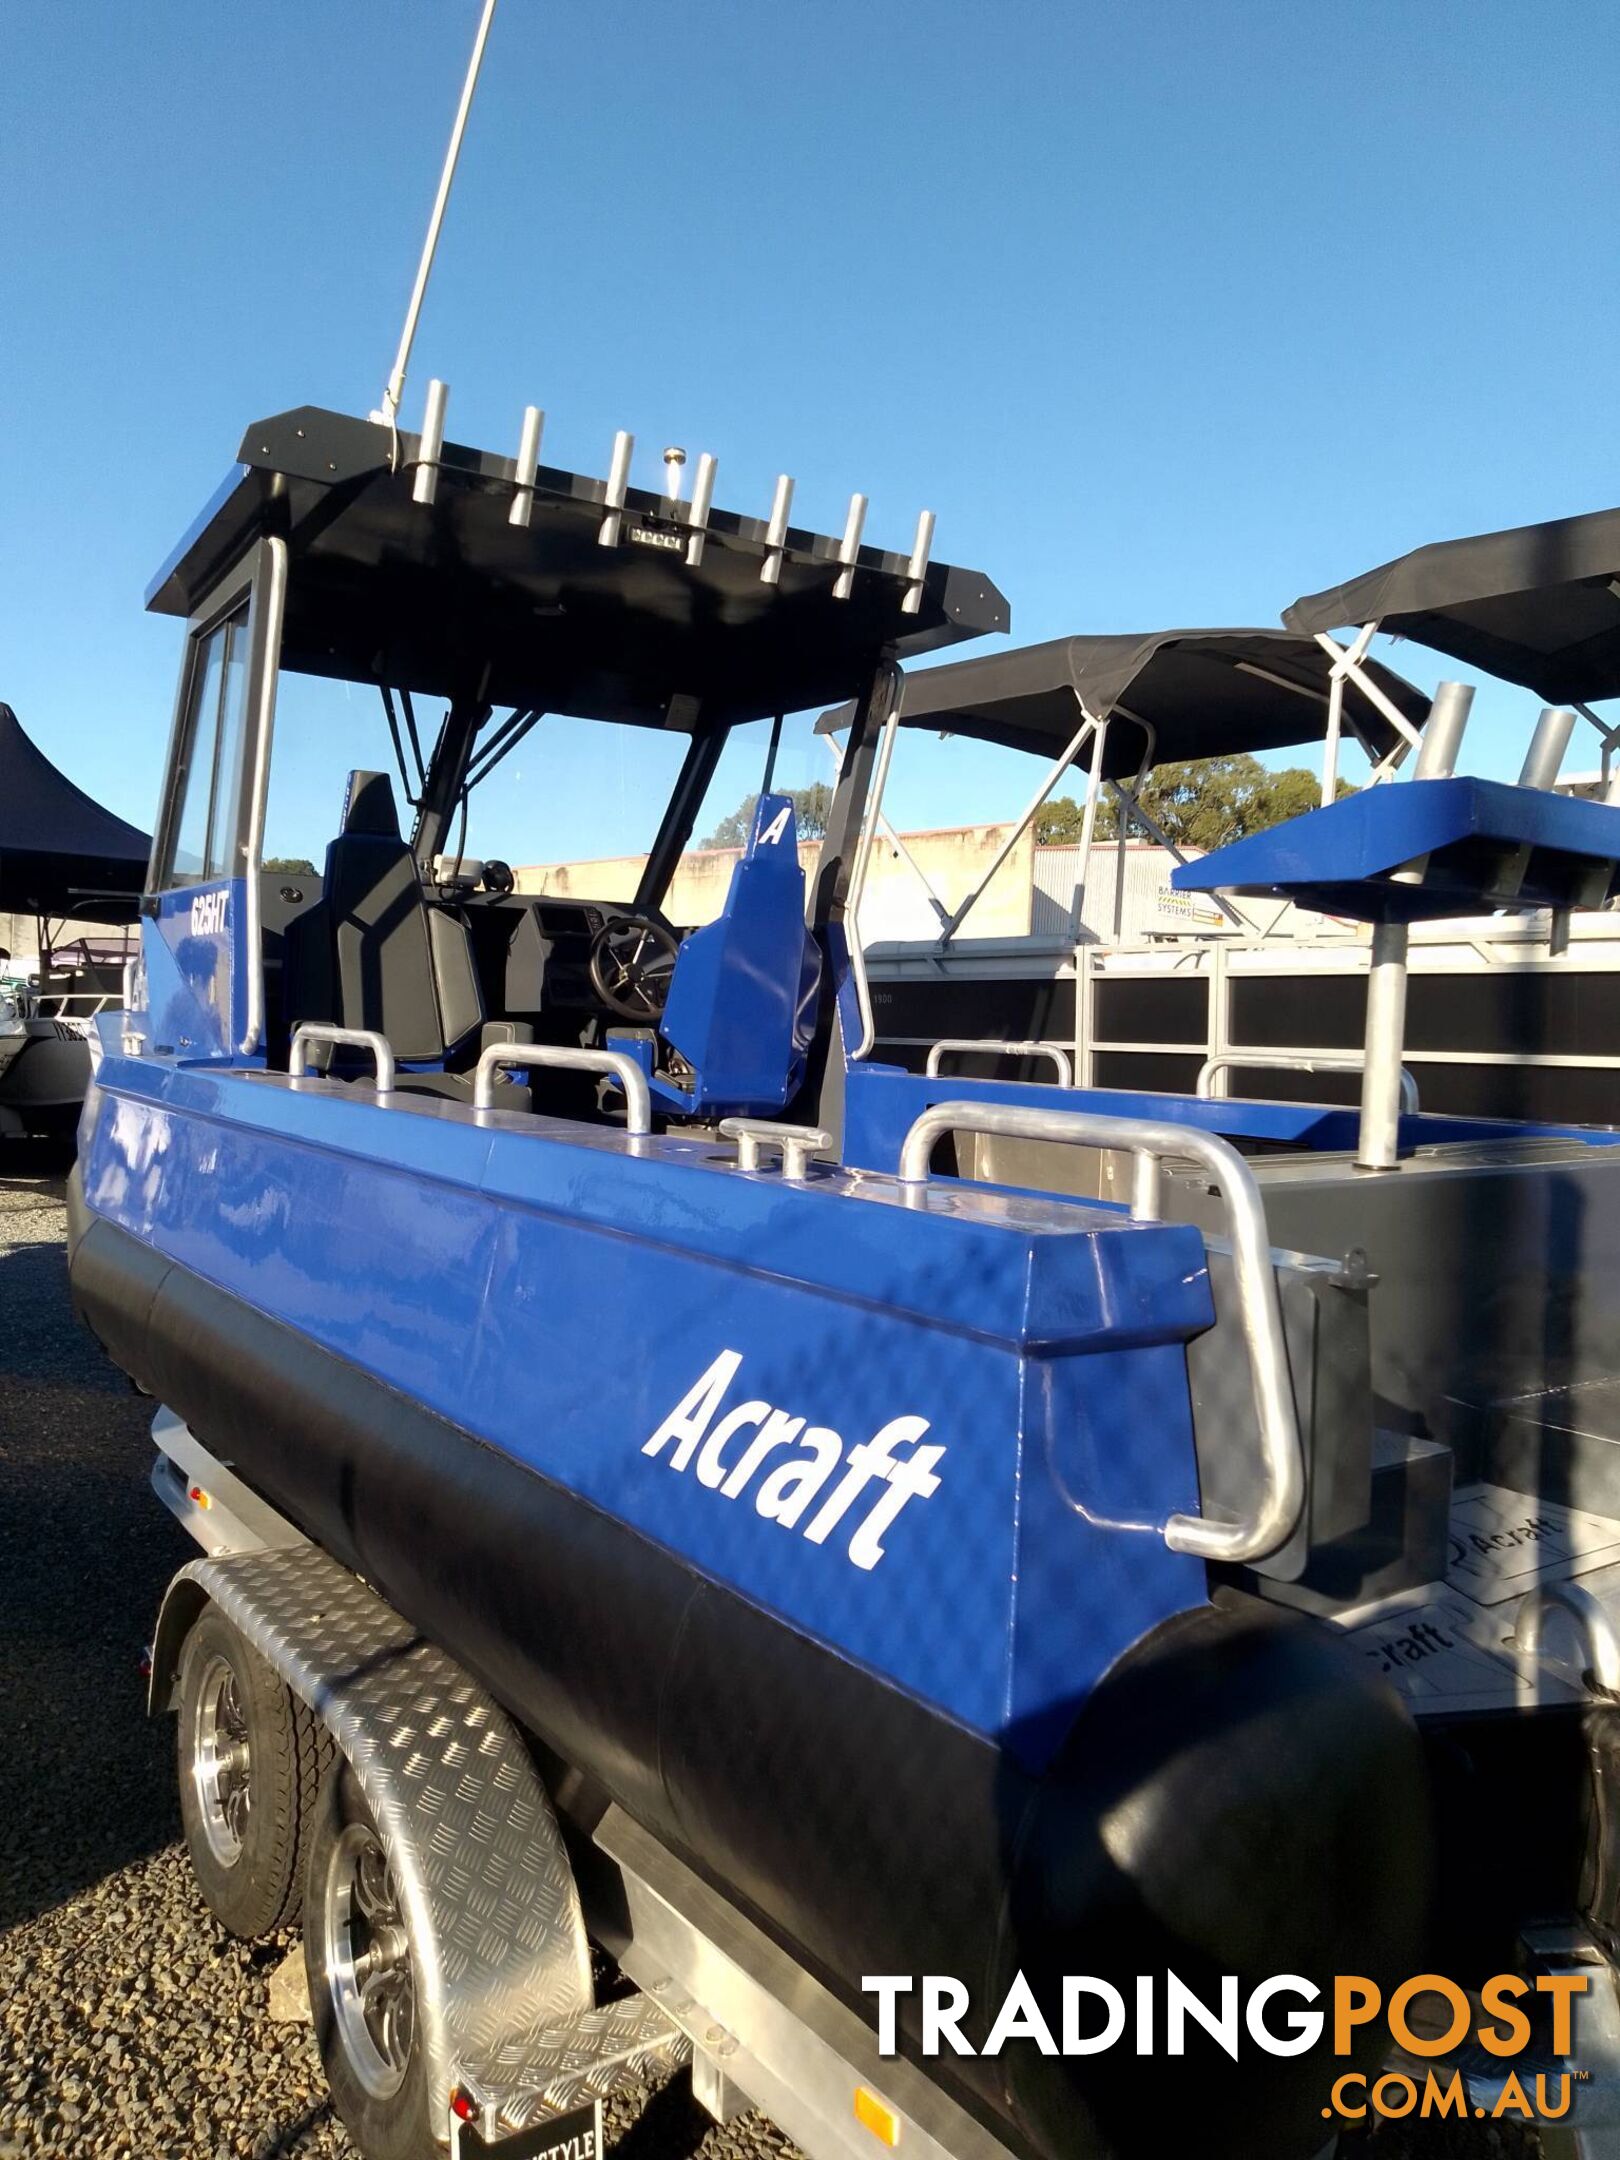 ACRAFT BRAND NEW ALUMINIUM 625HT ADVANCED FORWARD CABIN AND TRAILER ***PRICE ON APPLICATION***